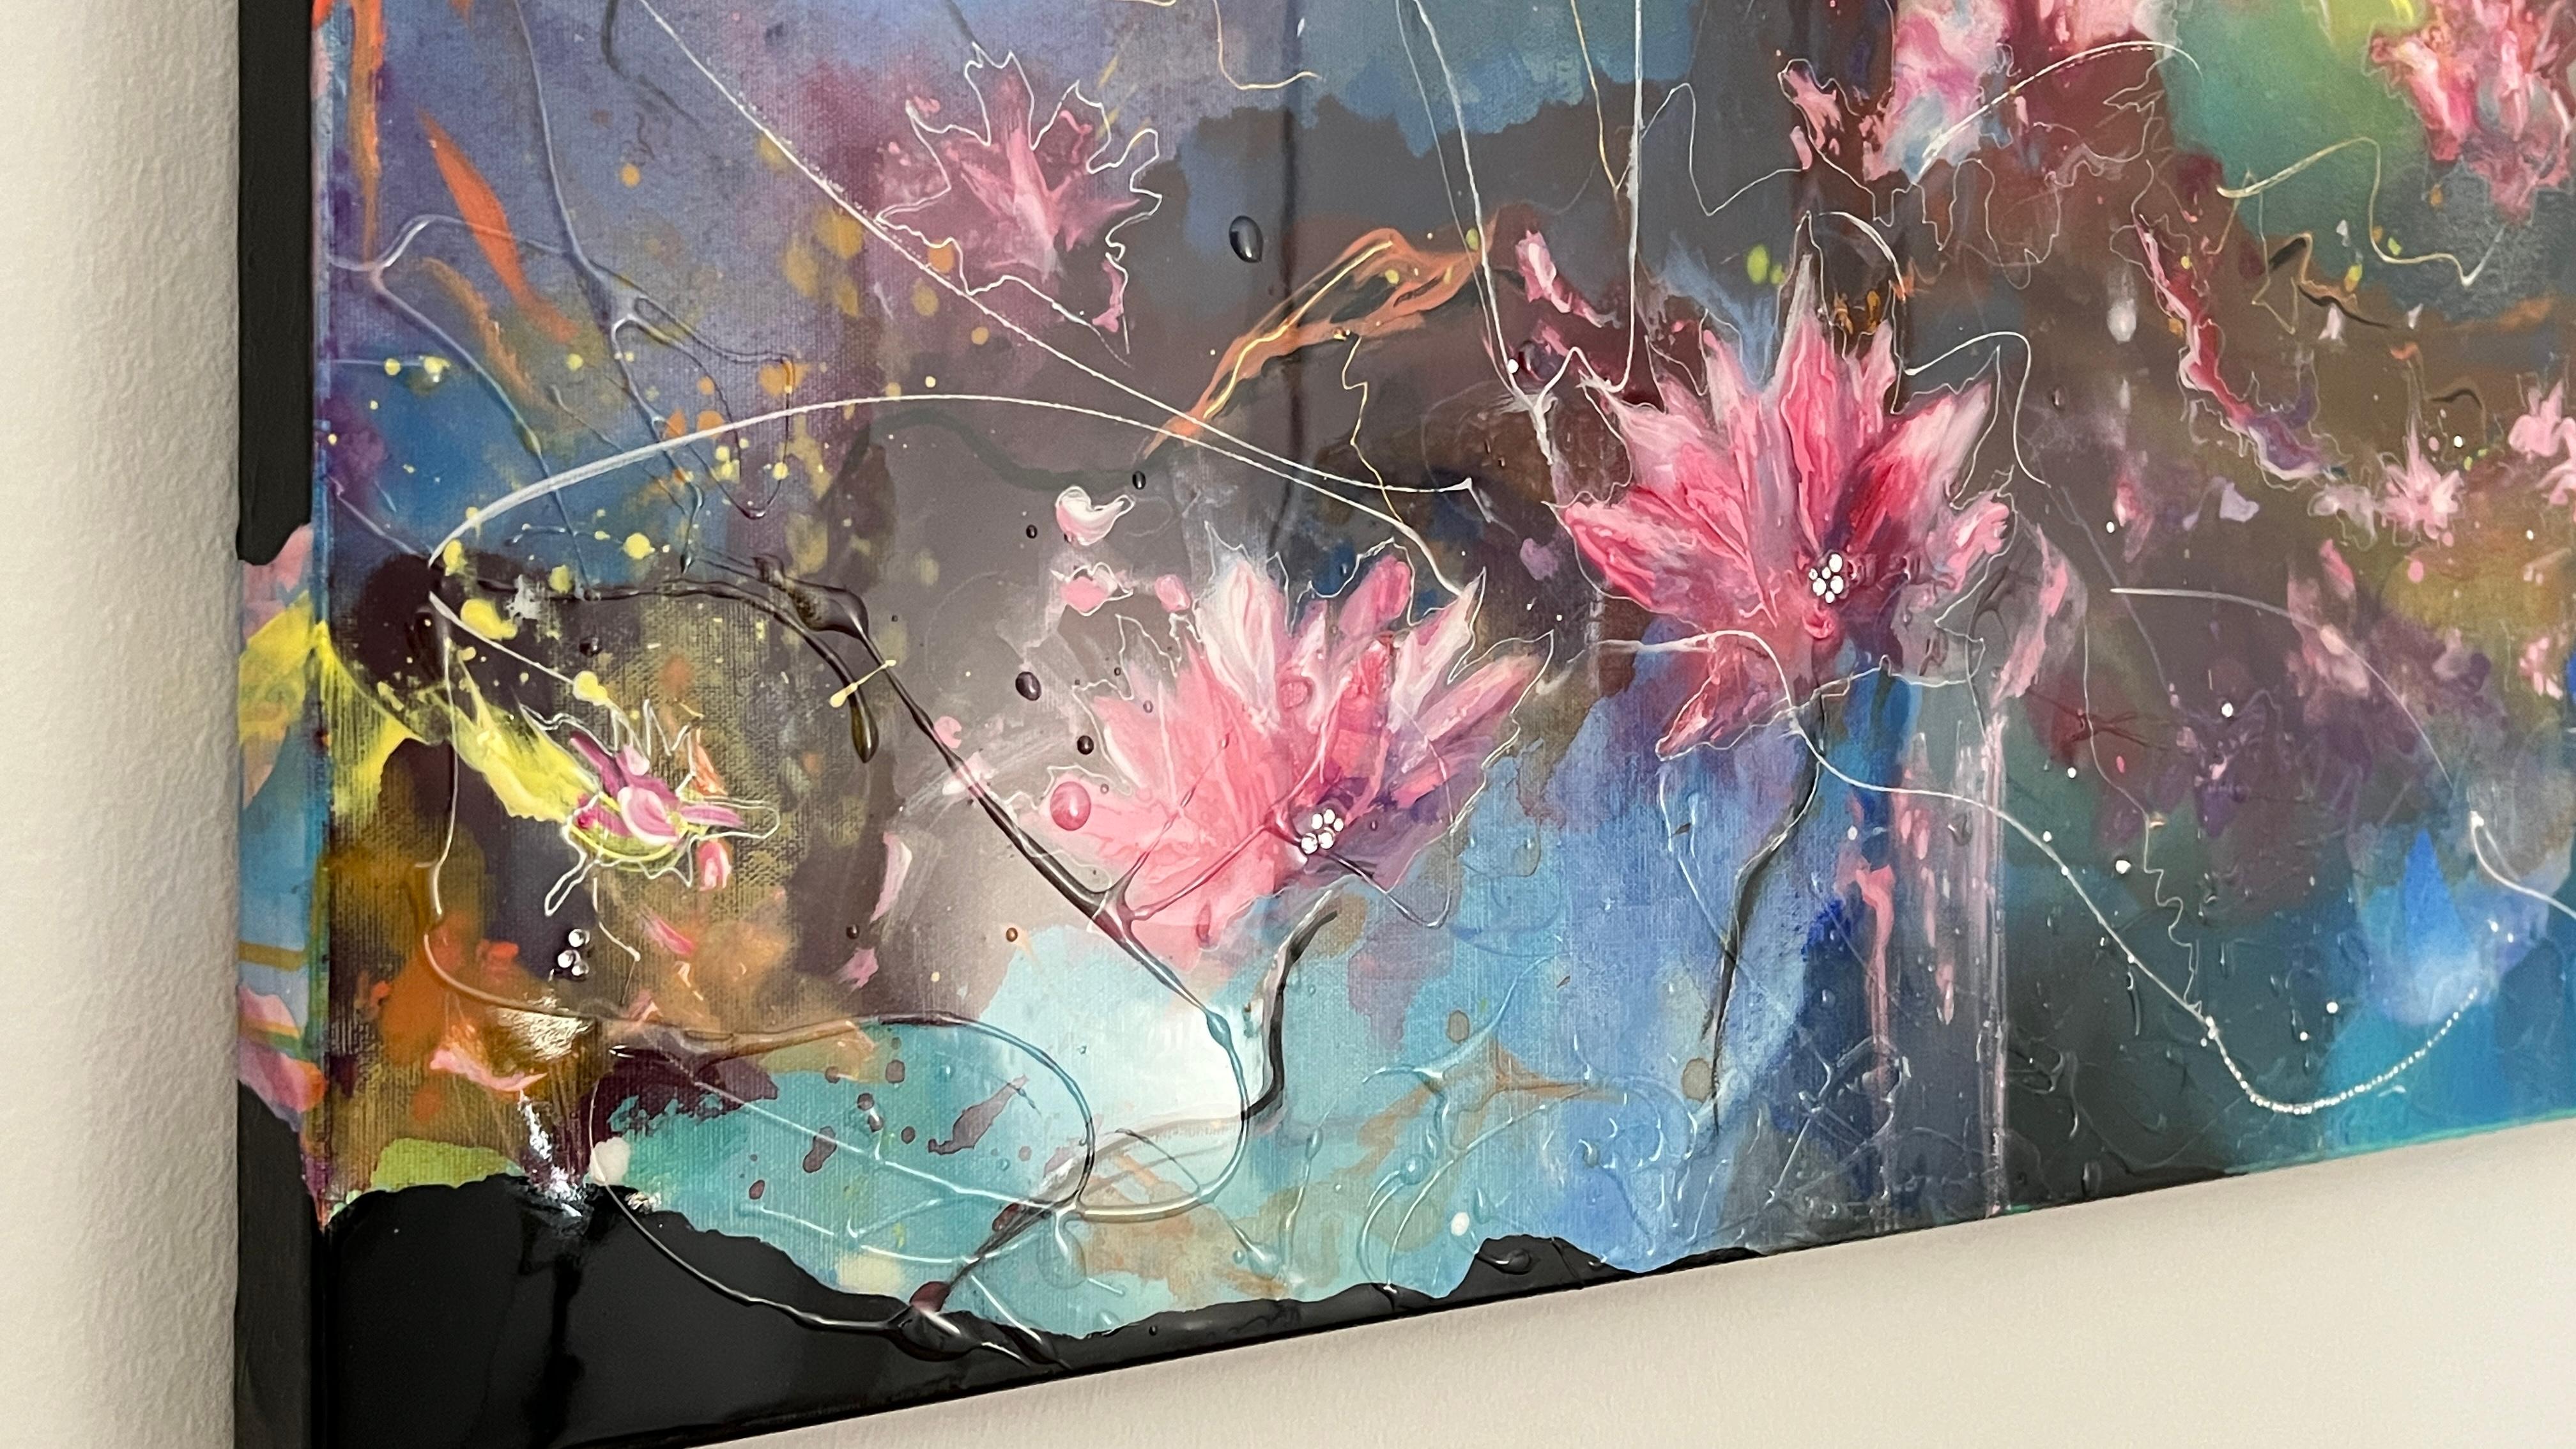 Water lily waltz - Abstract Painting by Lana Ritter